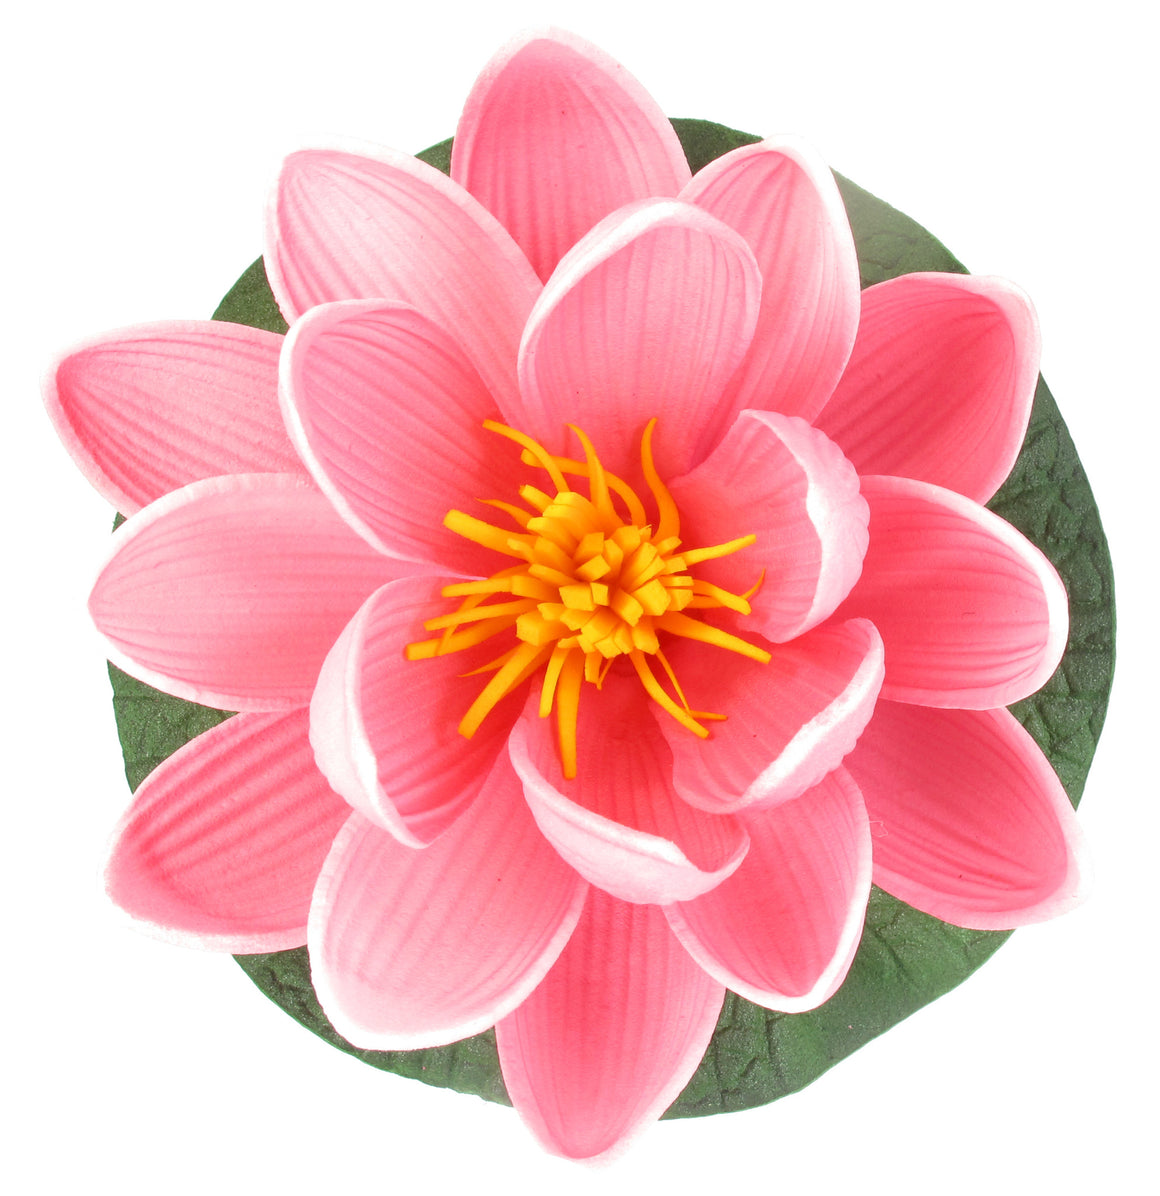 Small Floating Foam Water Lily Flower, For Small Water Feature, Approx. 3.25" x 3.25" x 2", Pink - TropicaZona